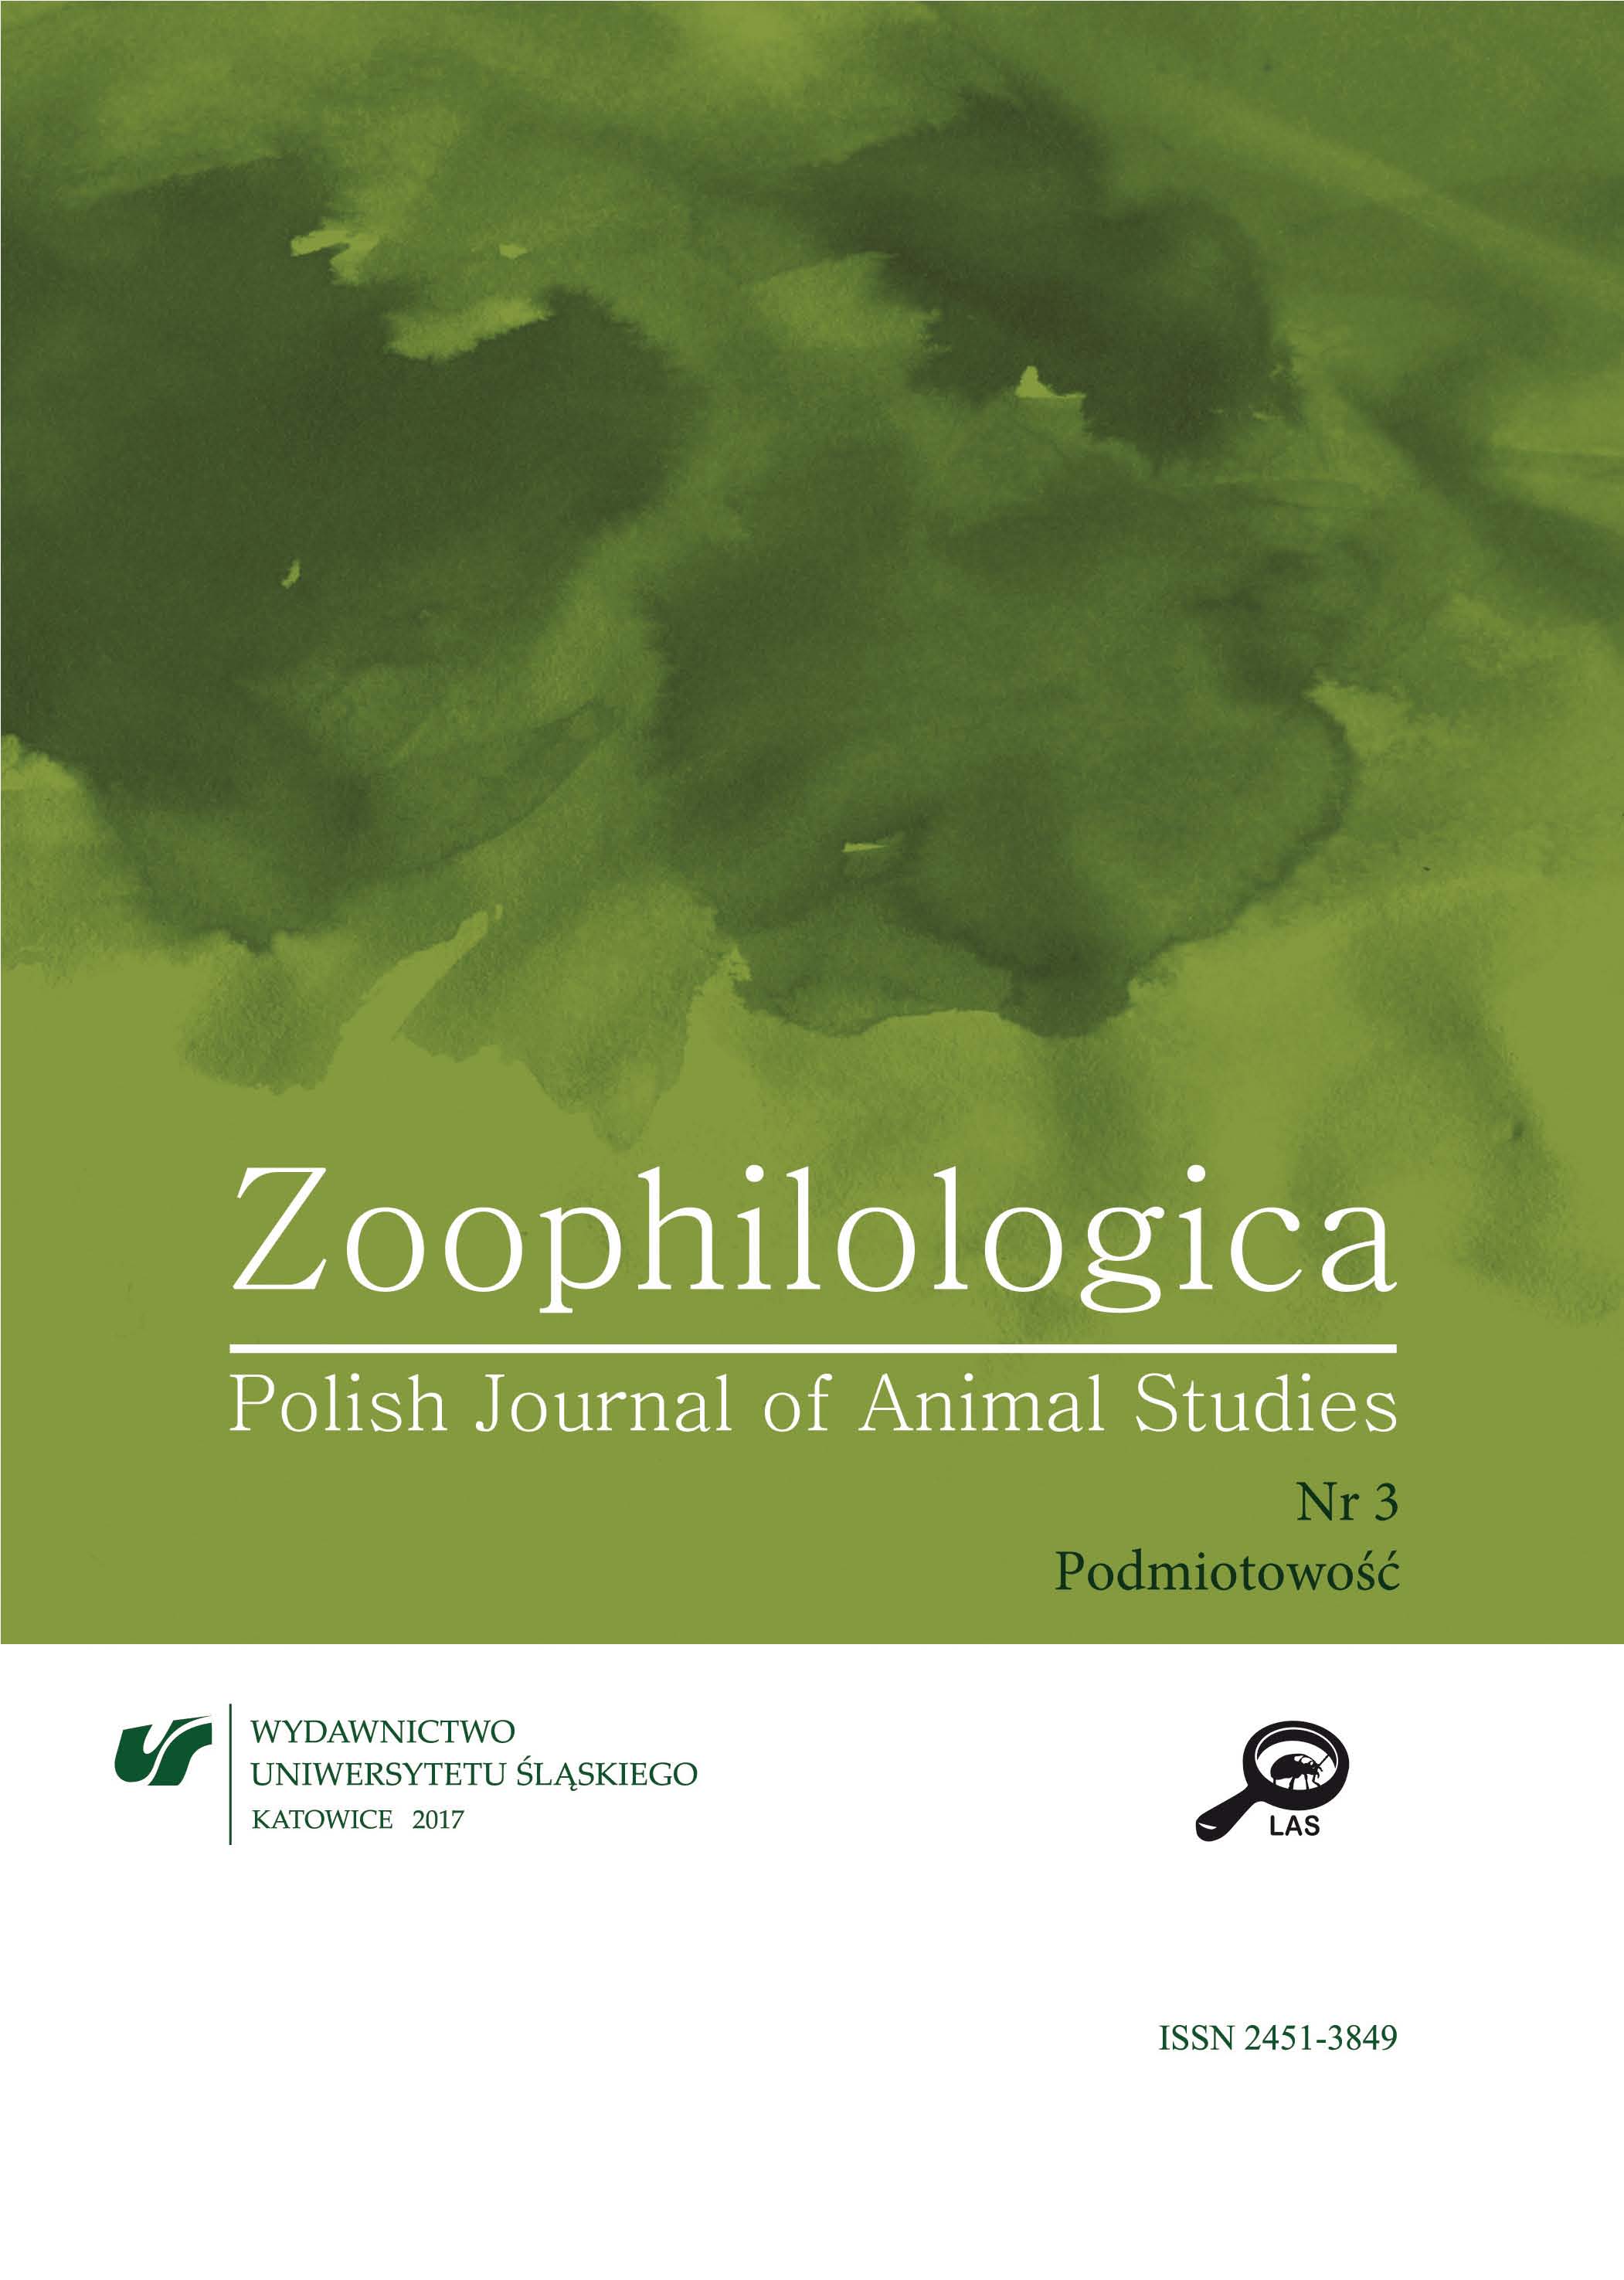 Book review: Małgorzata Rutkowska: “Dogs, cats and people. Domestic animals in American literature”. Publishing house of the Maria Curie-Skłodowska University. Lublin 2016 Cover Image